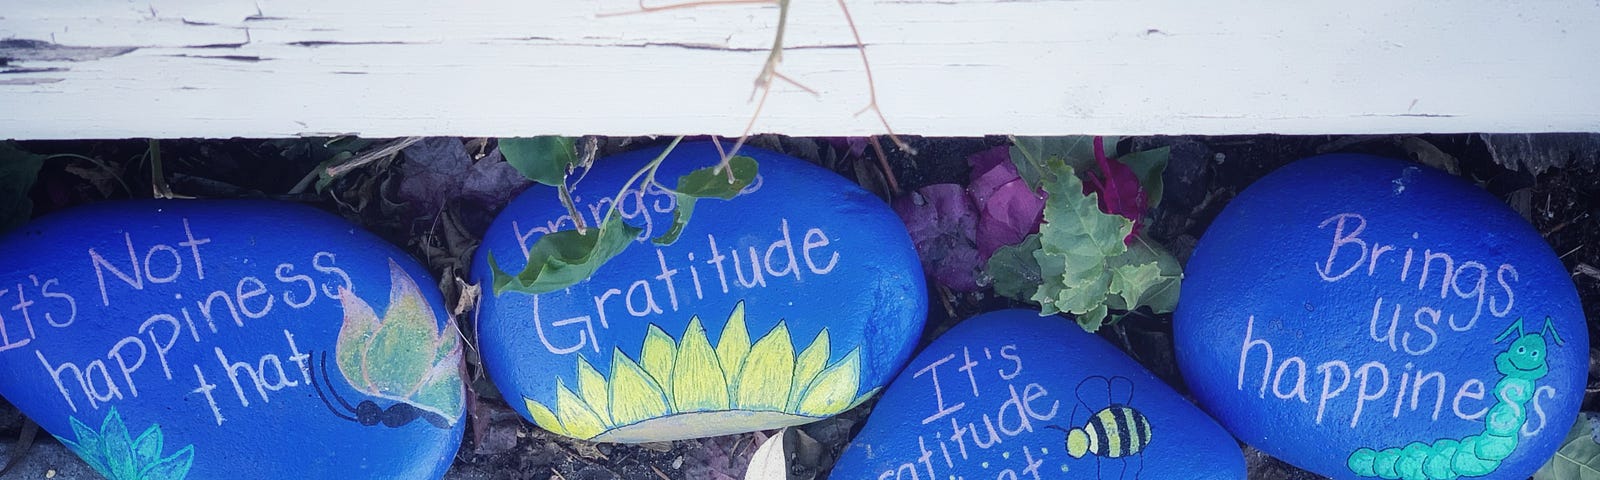 Image of stones with words written on them that say, “It’s not happiness that brings gratitude. It’s gratitude that brings happiness.”